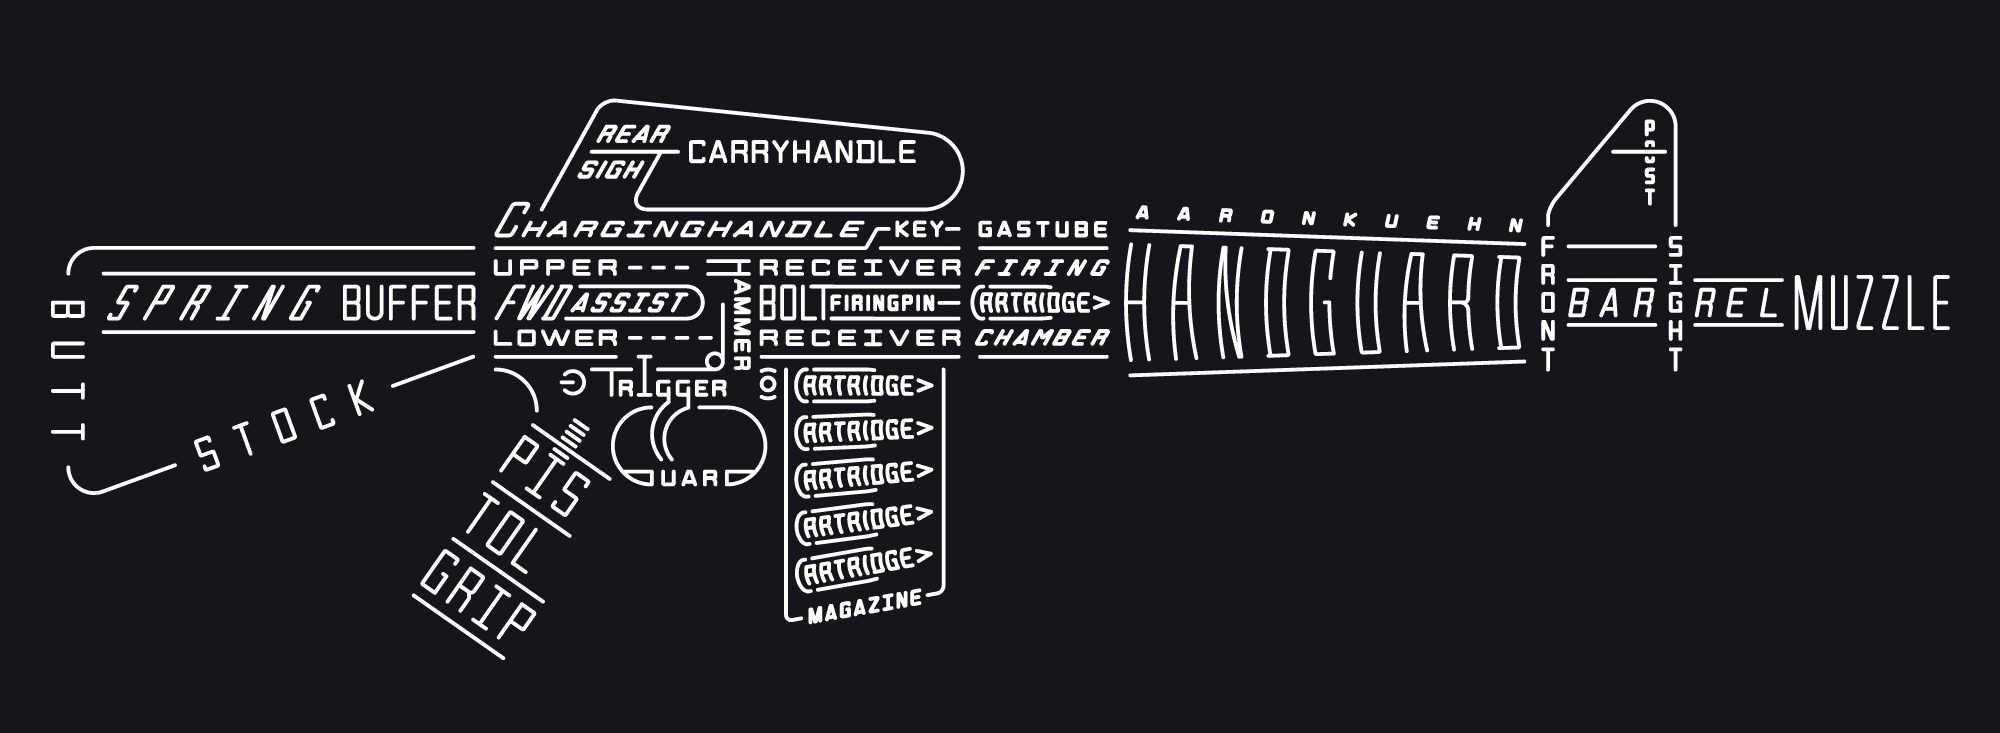 A diagram of an AR-15 / M16 assault rifle, composed of the names of its component parts using typography.